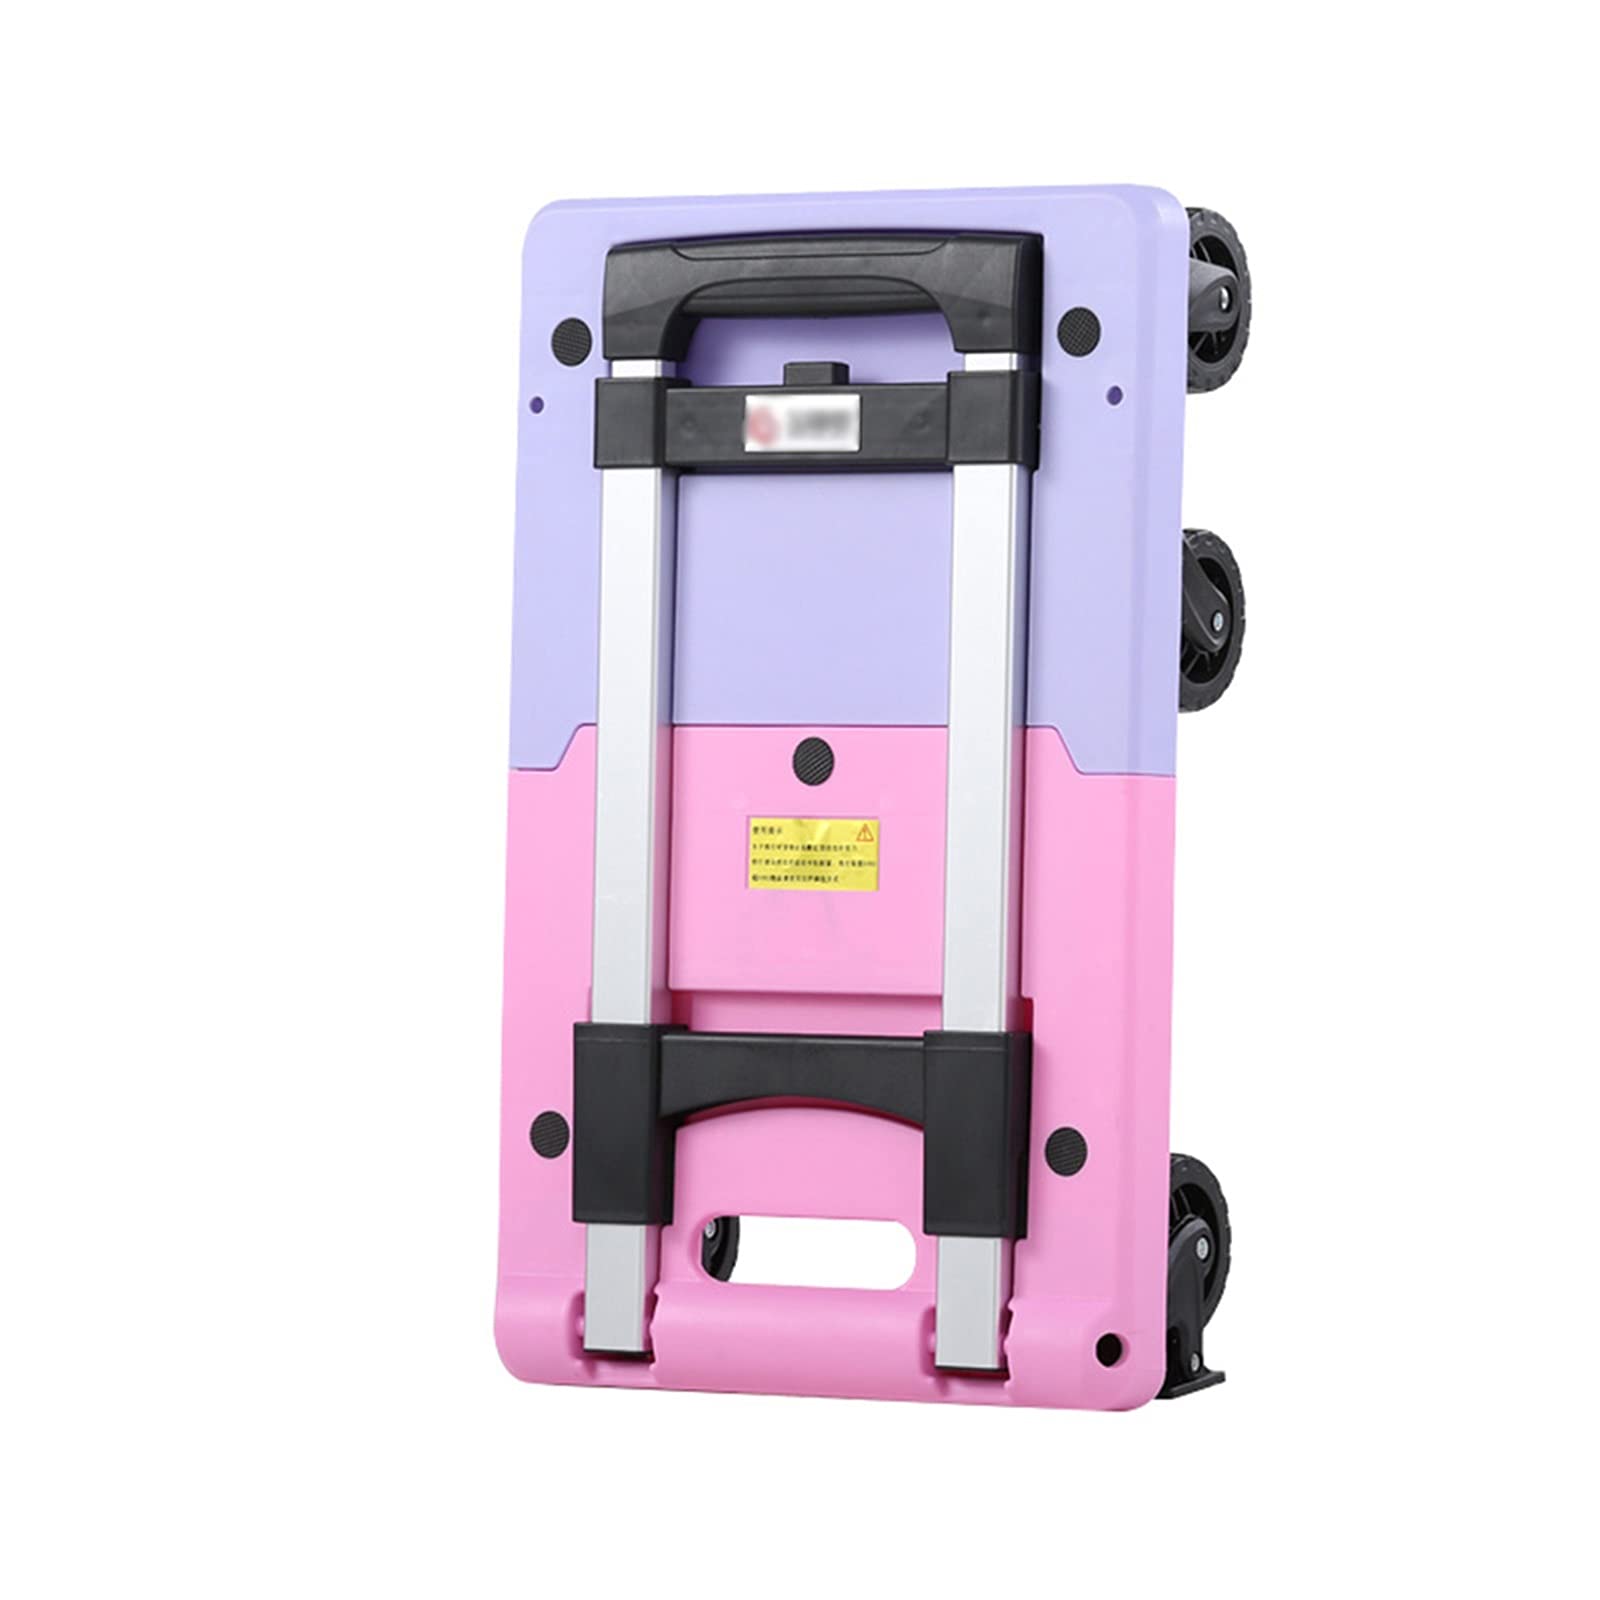 Platform Trucks Flatbed Cart Platform Hand Truck Small Foldable Push Cart for Easy Storage and 360 Degree Swivel Wheels Retractable Chassis Multi-Color Push Cart